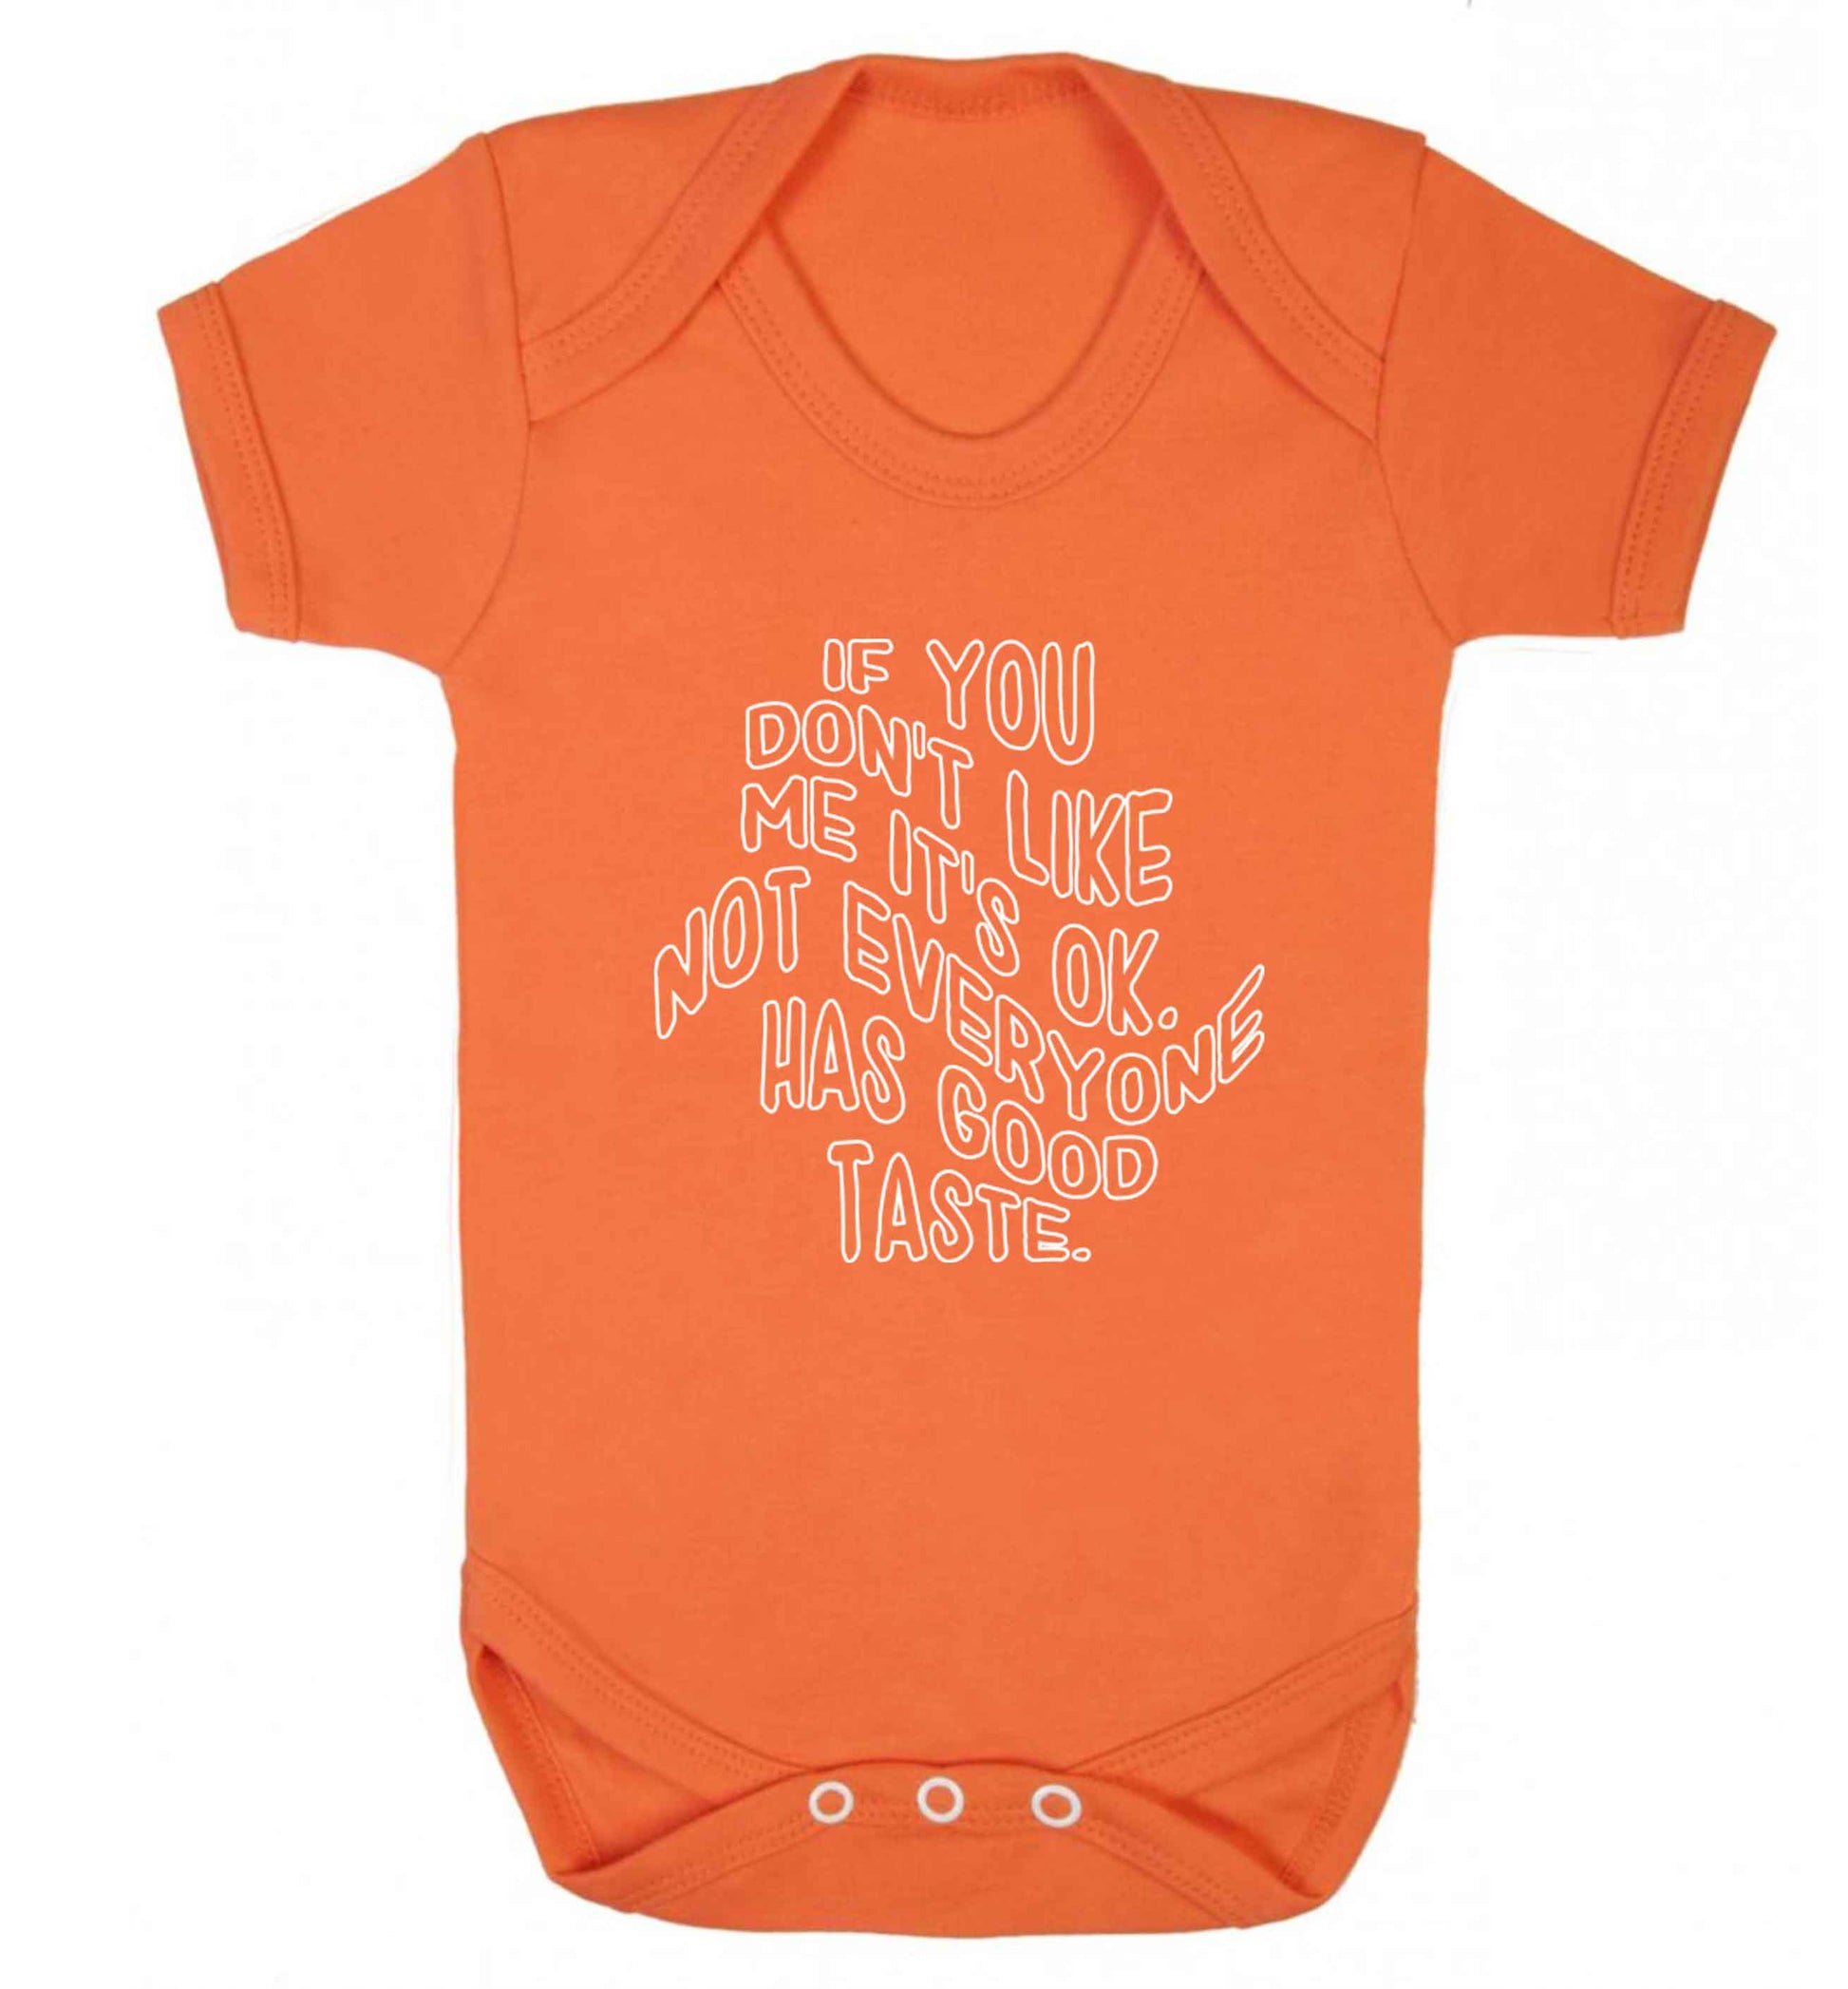 If you don't like me it's ok not everyone has good taste baby vest orange 18-24 months